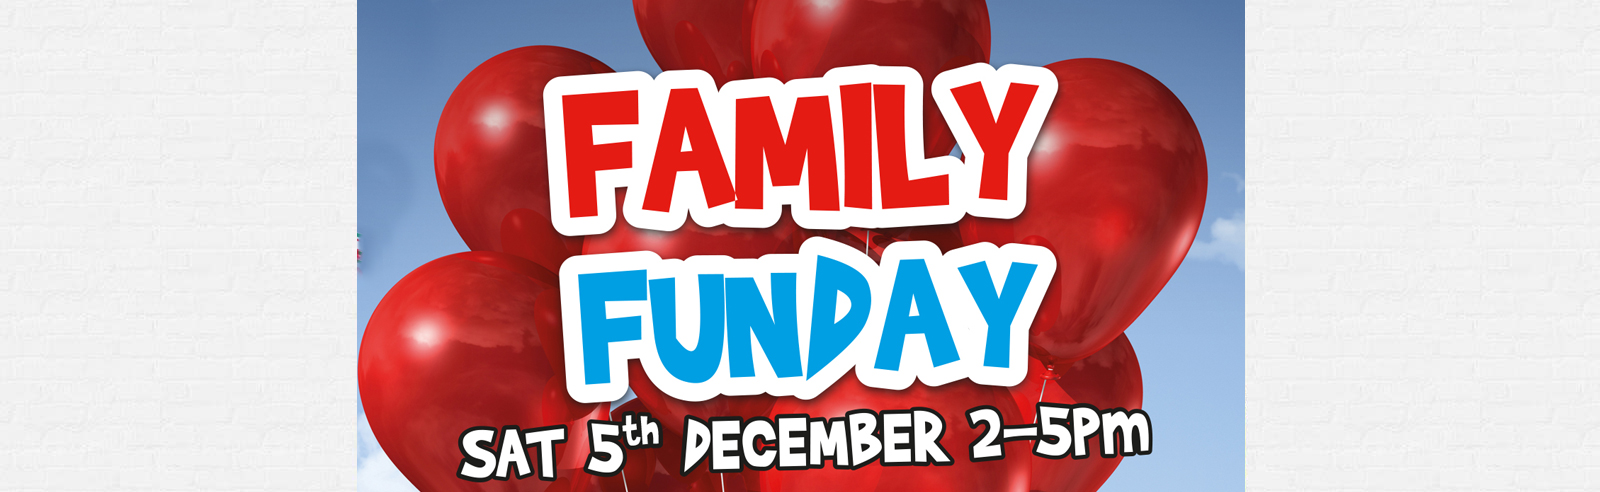 Supermac’s Castlebar Family Fun Day this Sat!